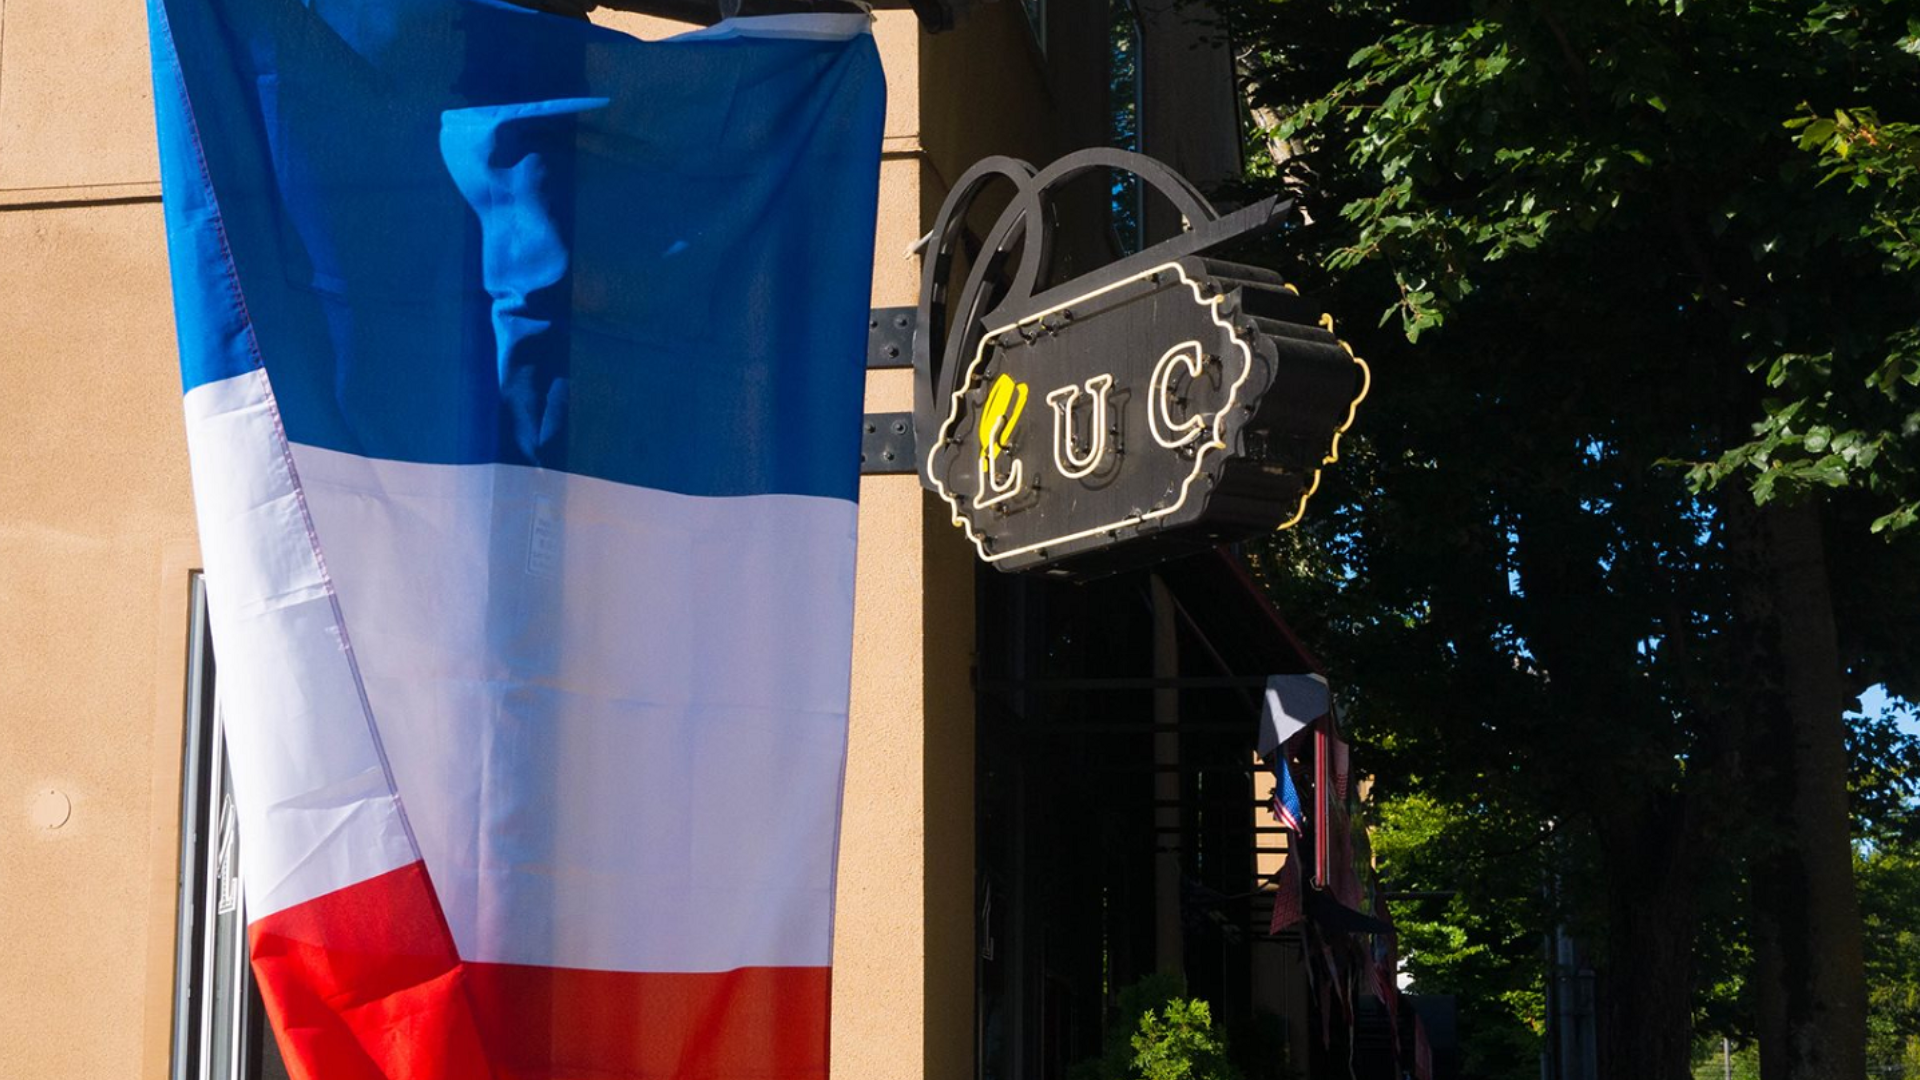 His Seattle restaurant, LUC, is celebrating Bastille Day with a special party - complete with great food, family-friendly fun, and entertainment.